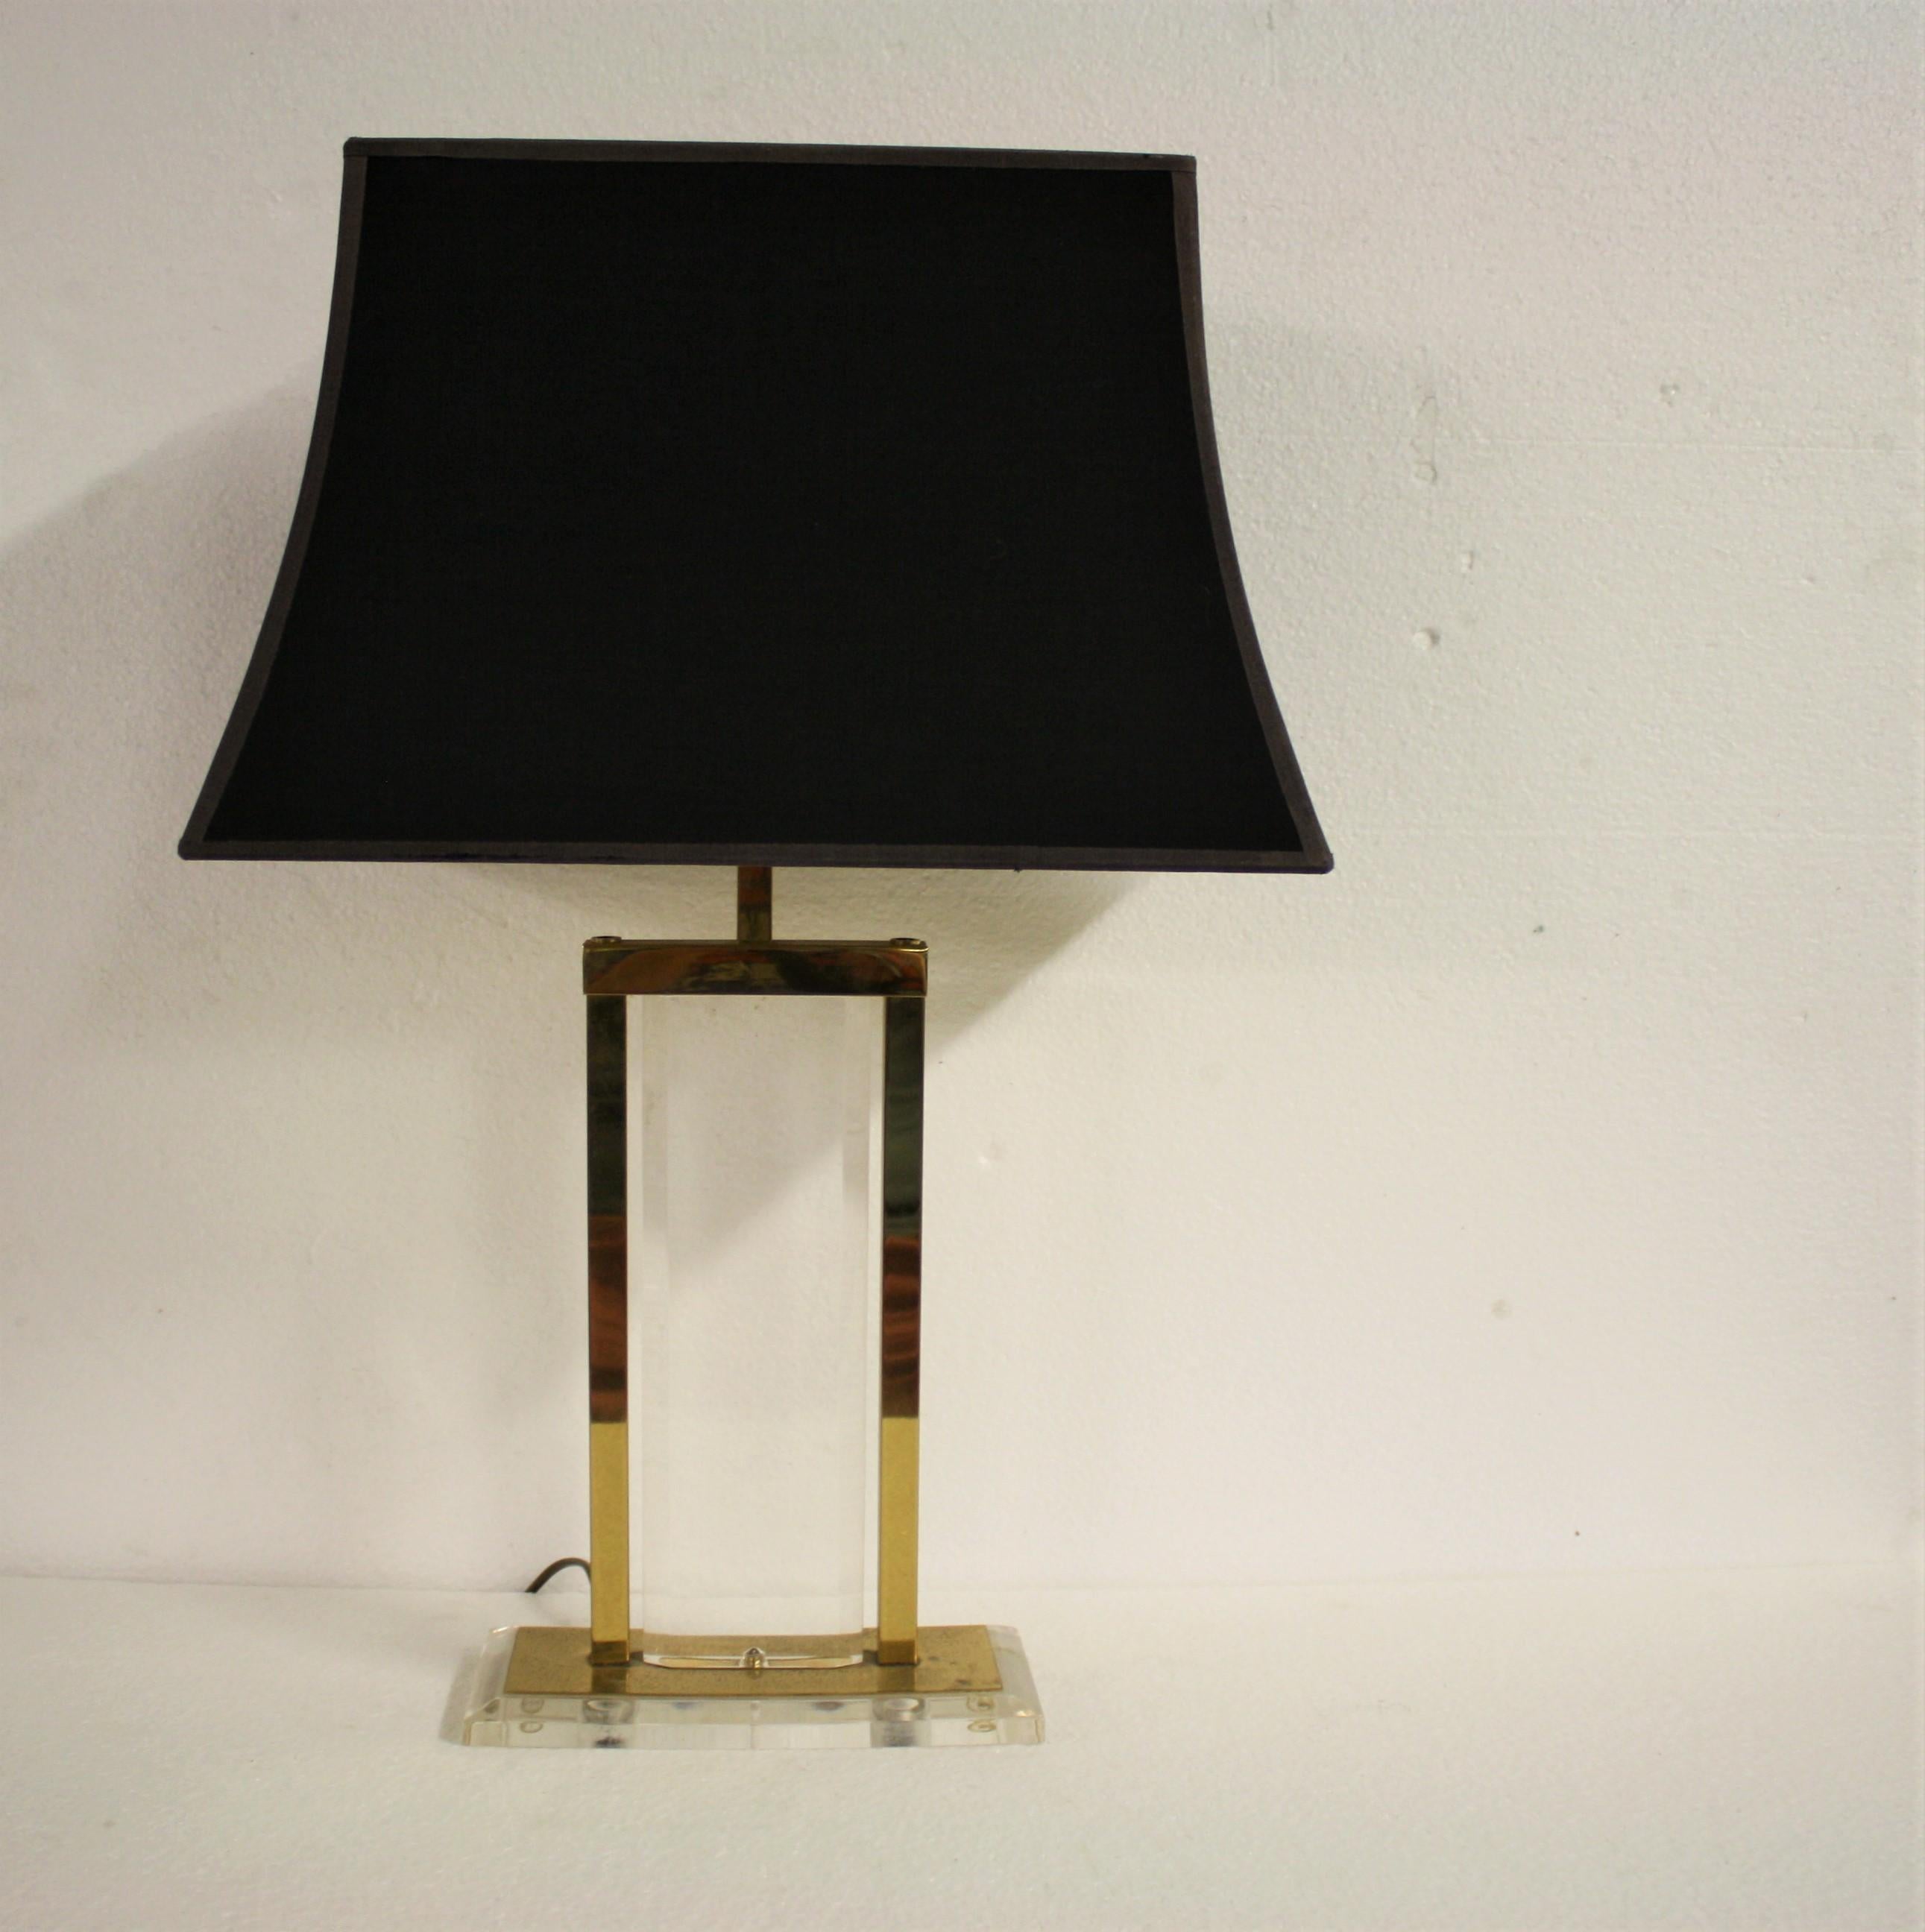 Brass and Lucite table lamp with a black fabric shade. 

The lampshade has a charming golden finish on the inside and emits a warm light.

The Lucite on the lamp is in good condition and the brass is slightly patinated, which makes the item look